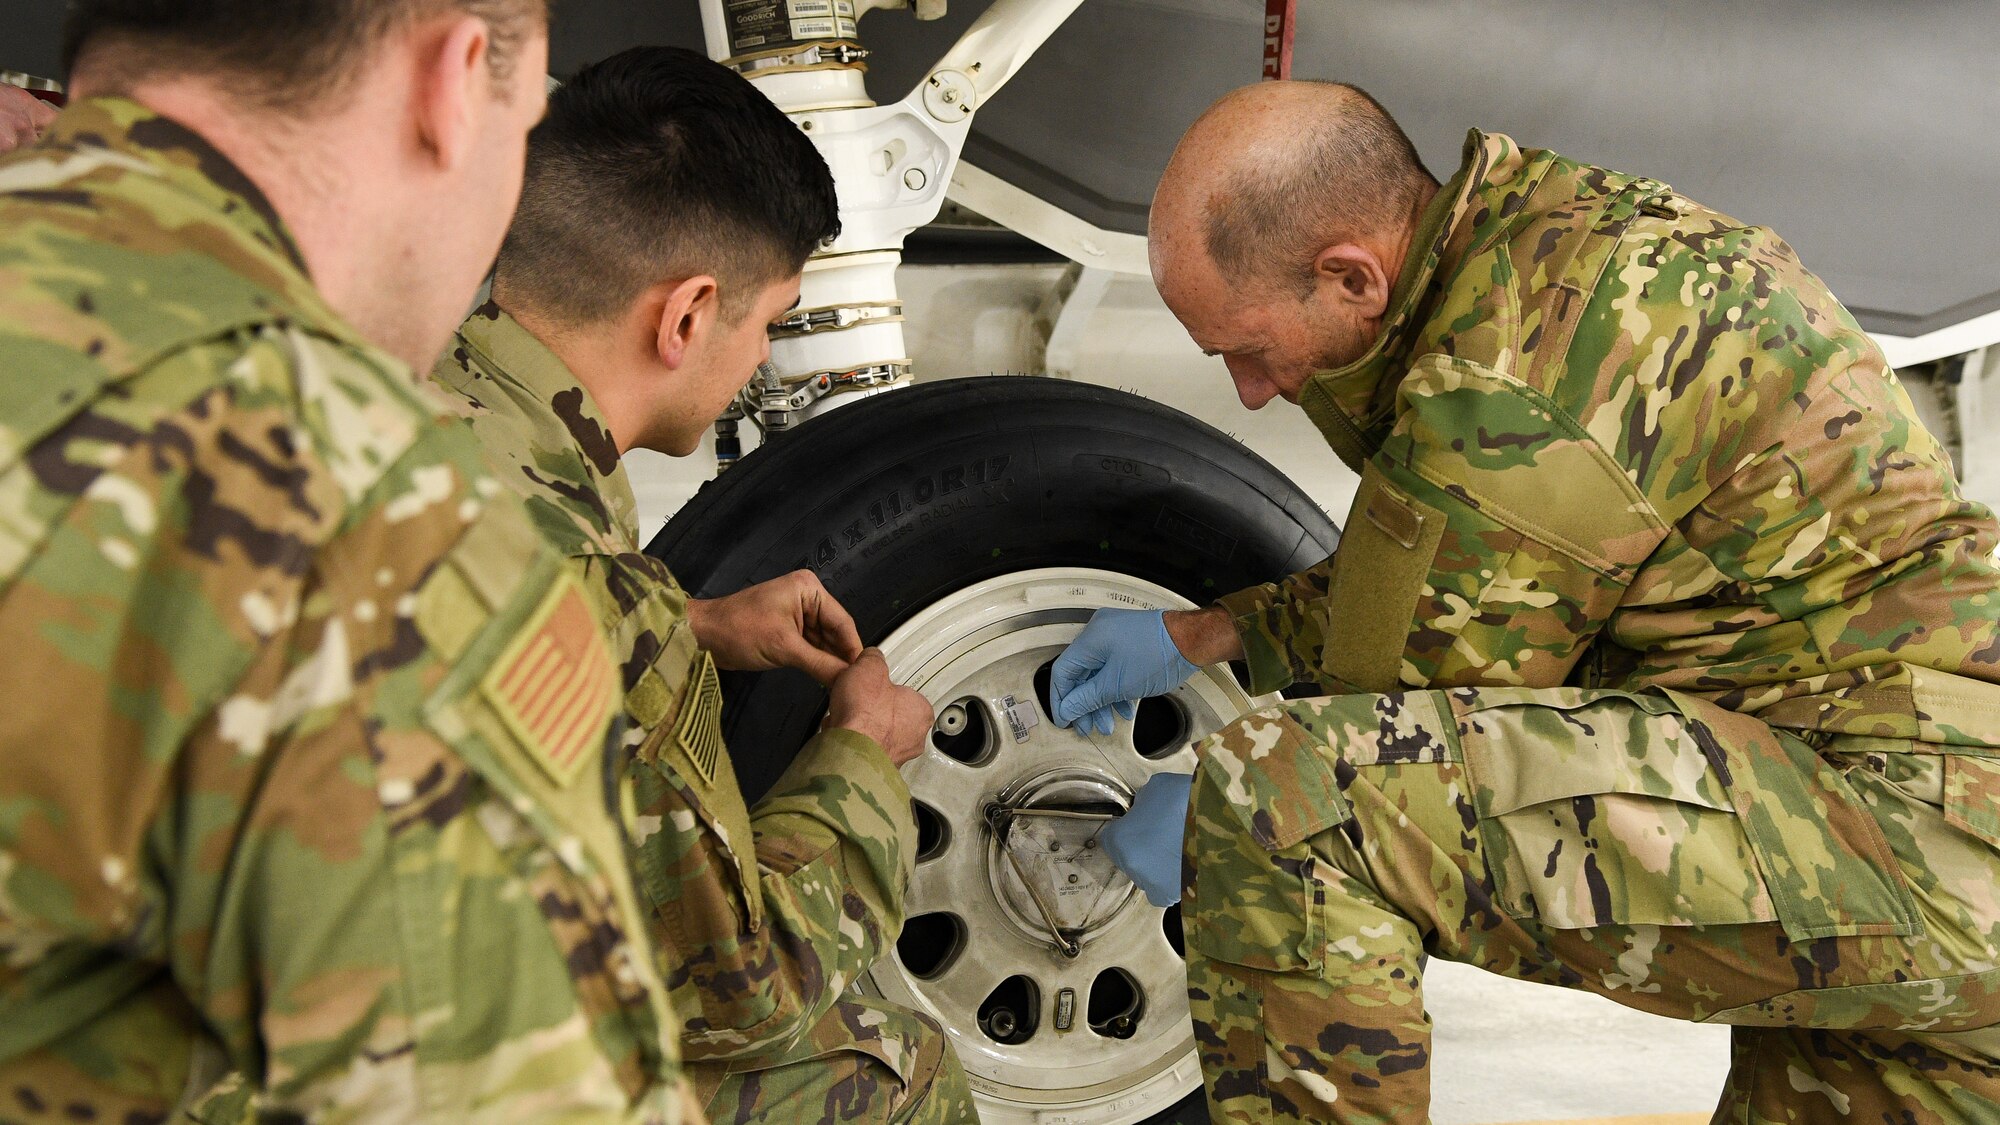 Gen. Mike Holmes, commander of Air Combat Command, and two other Airmen change a tire on an F-35 Lightning II.